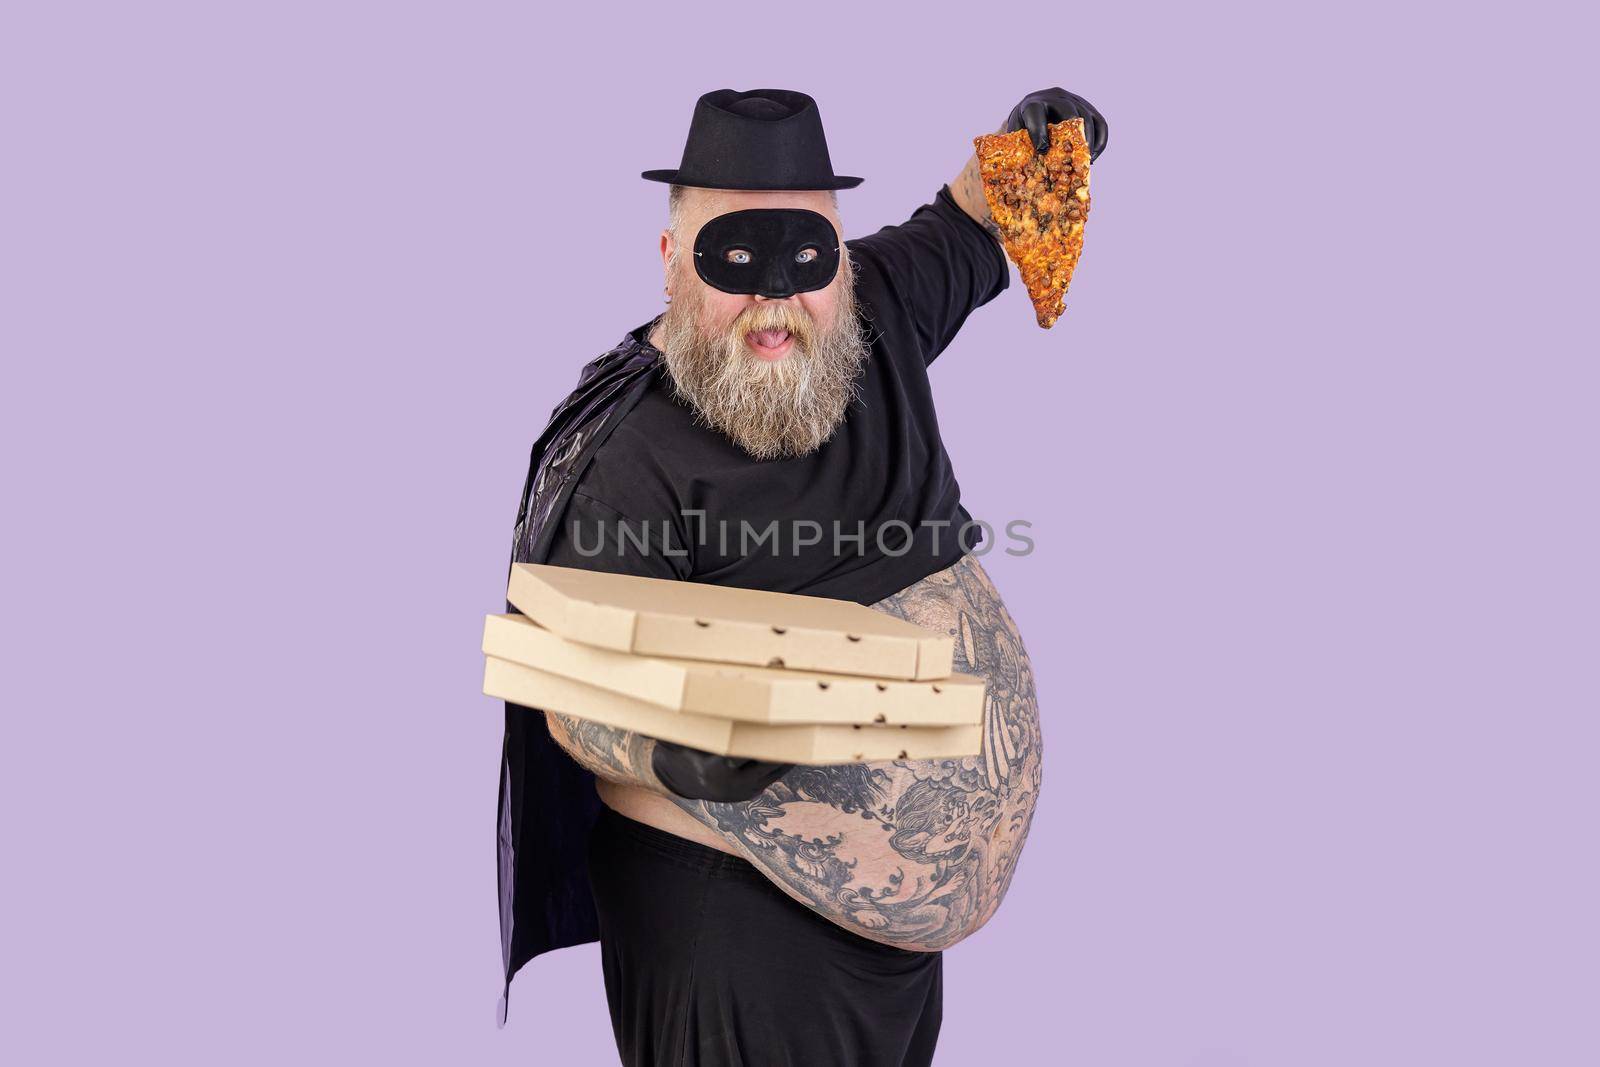 Funny plump man in hero suit with large bare abdomen holds boxes stack and slice of tasty pizza standing on purple background in studio